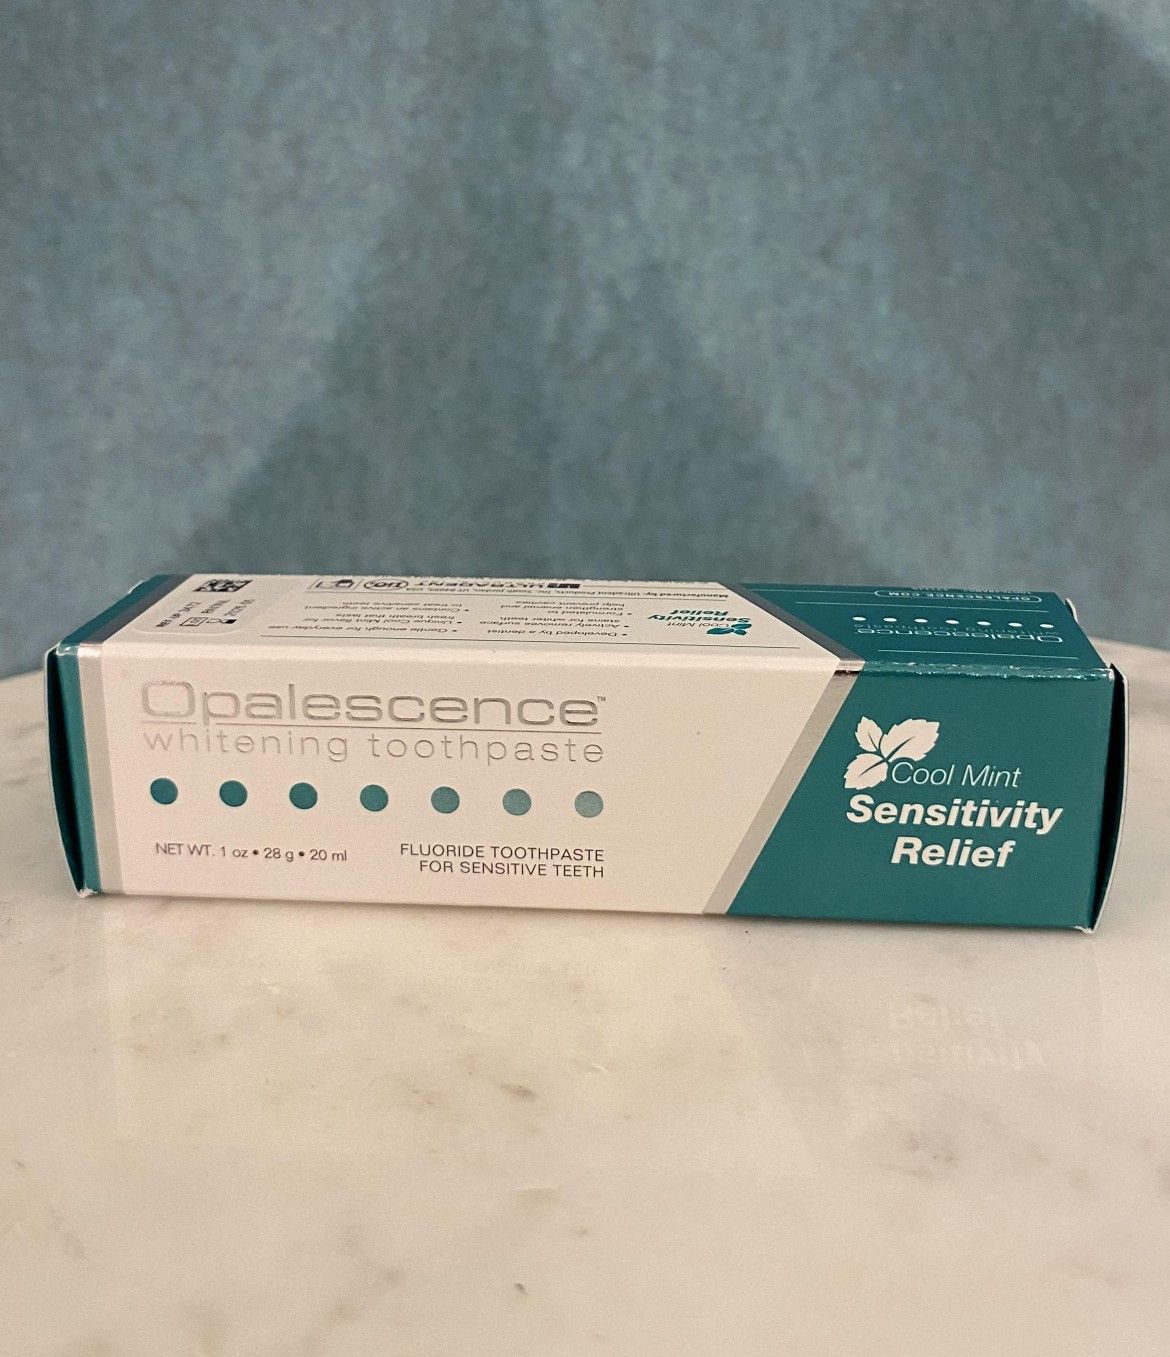 Opalescence Whitening Toothpaste - Sensitivity Relief